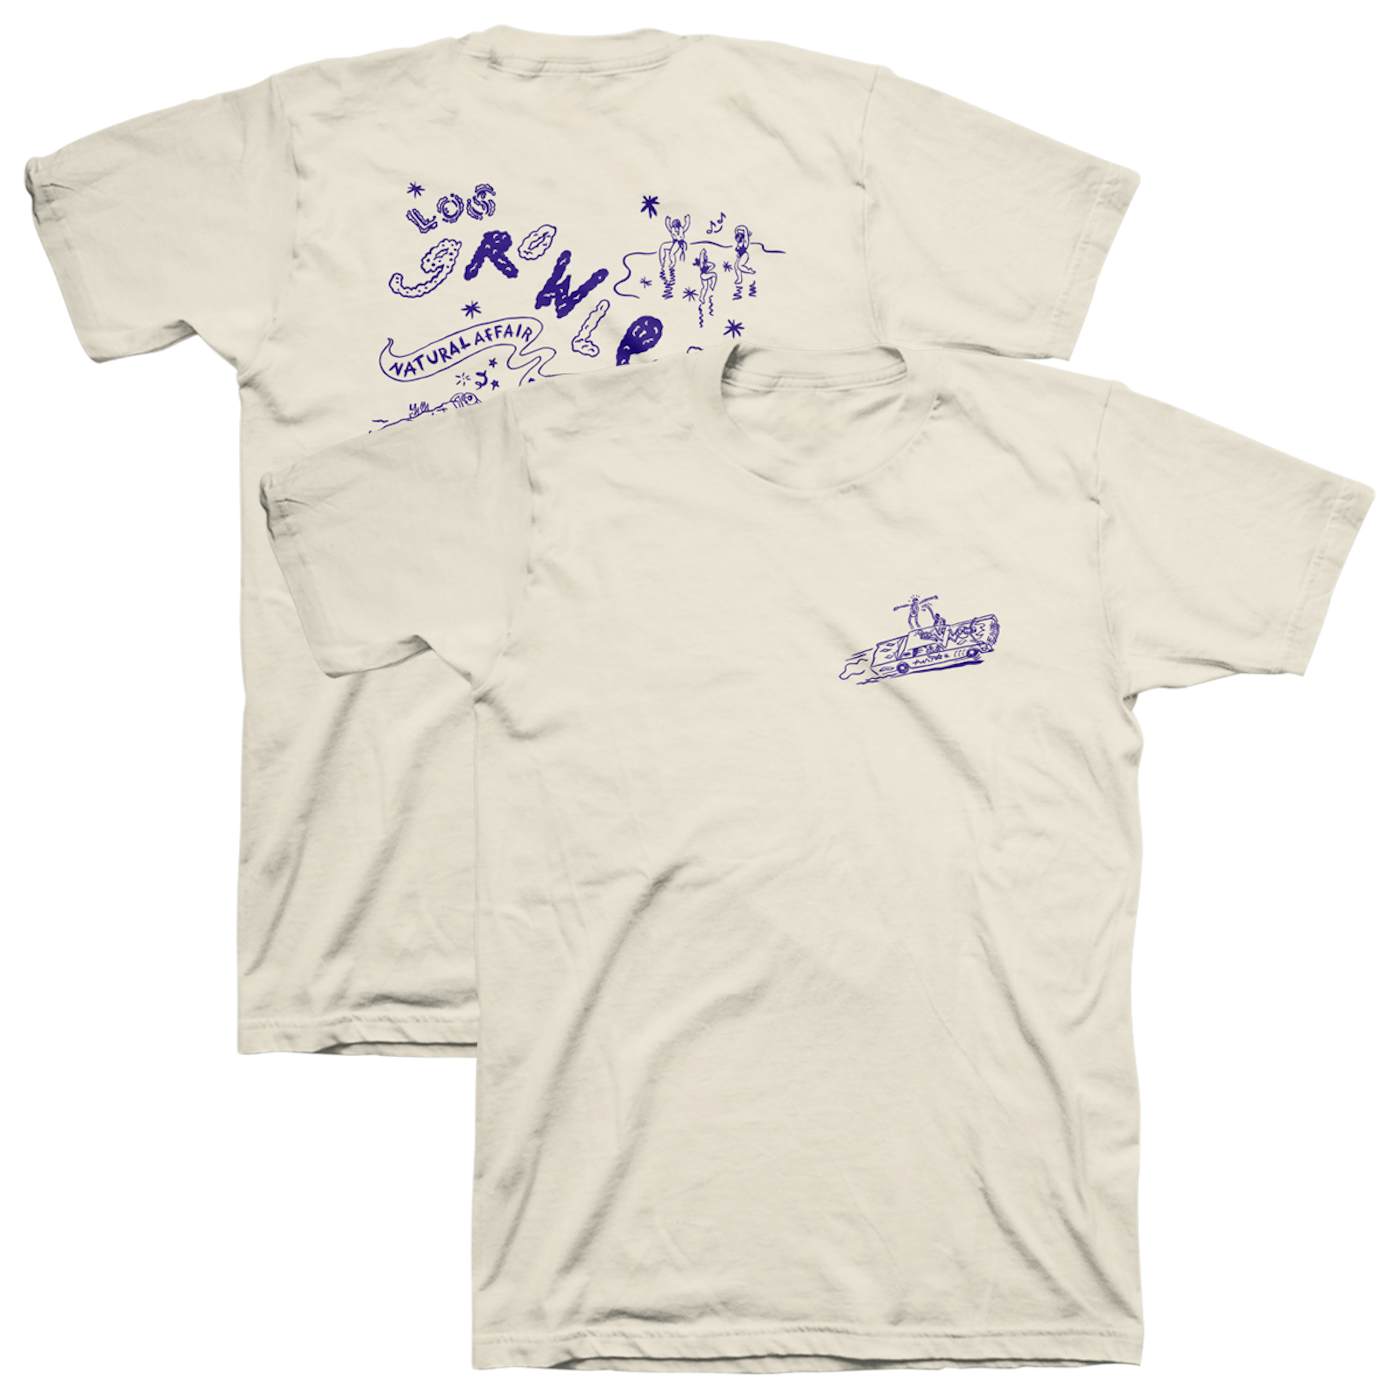 The Growlers Spring 2020 Tour T-Shirt